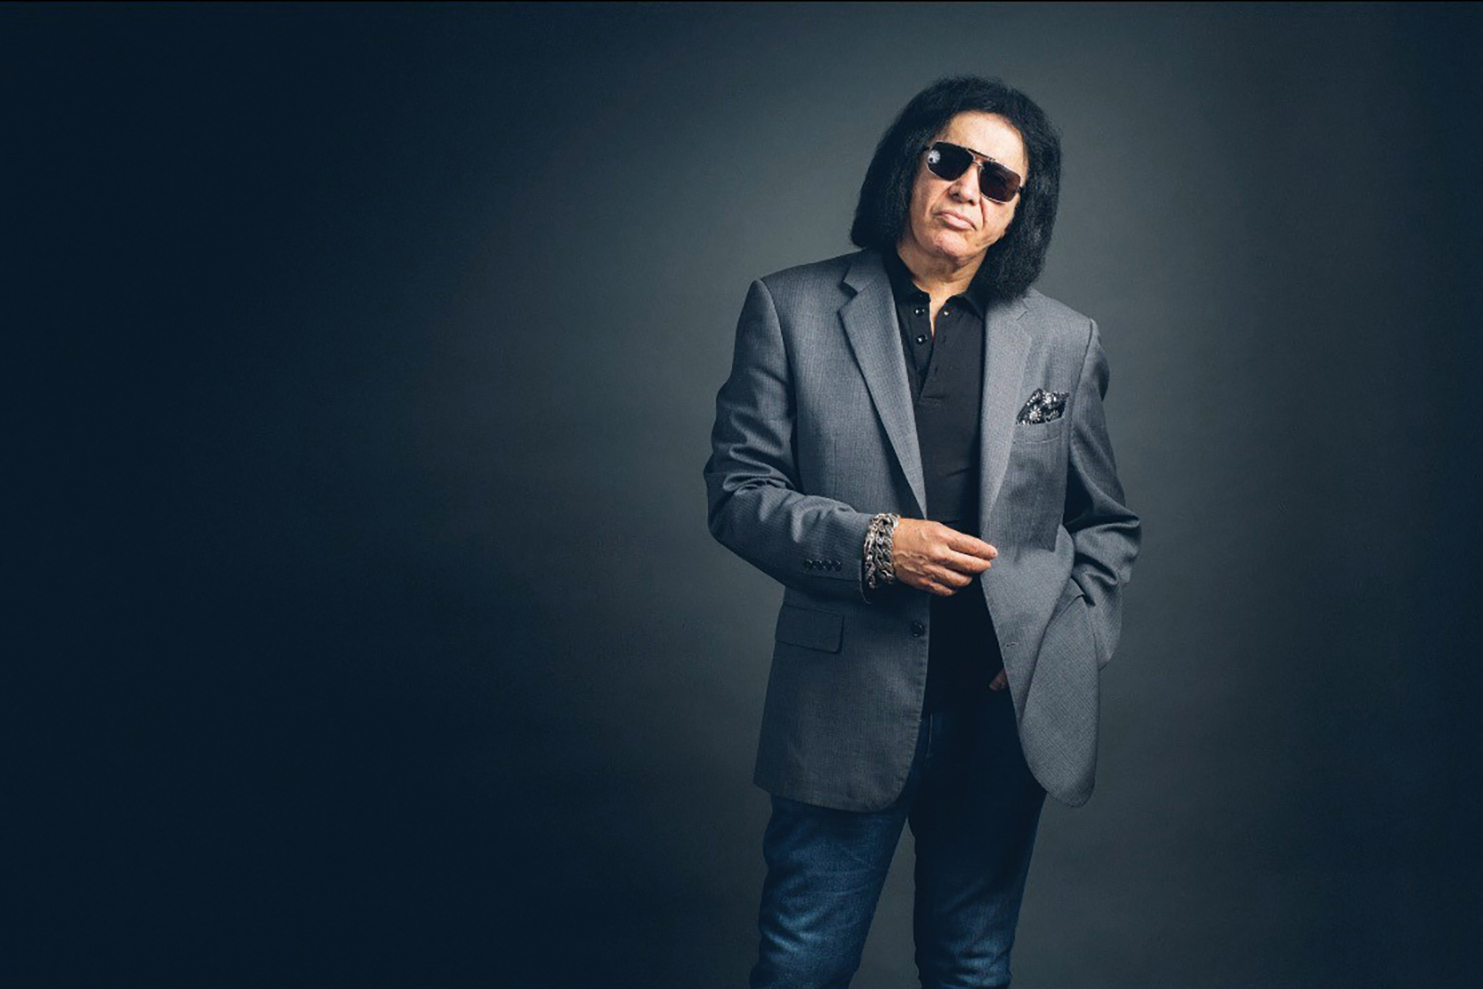 A Conversation With Gene Simmons About Power and Money